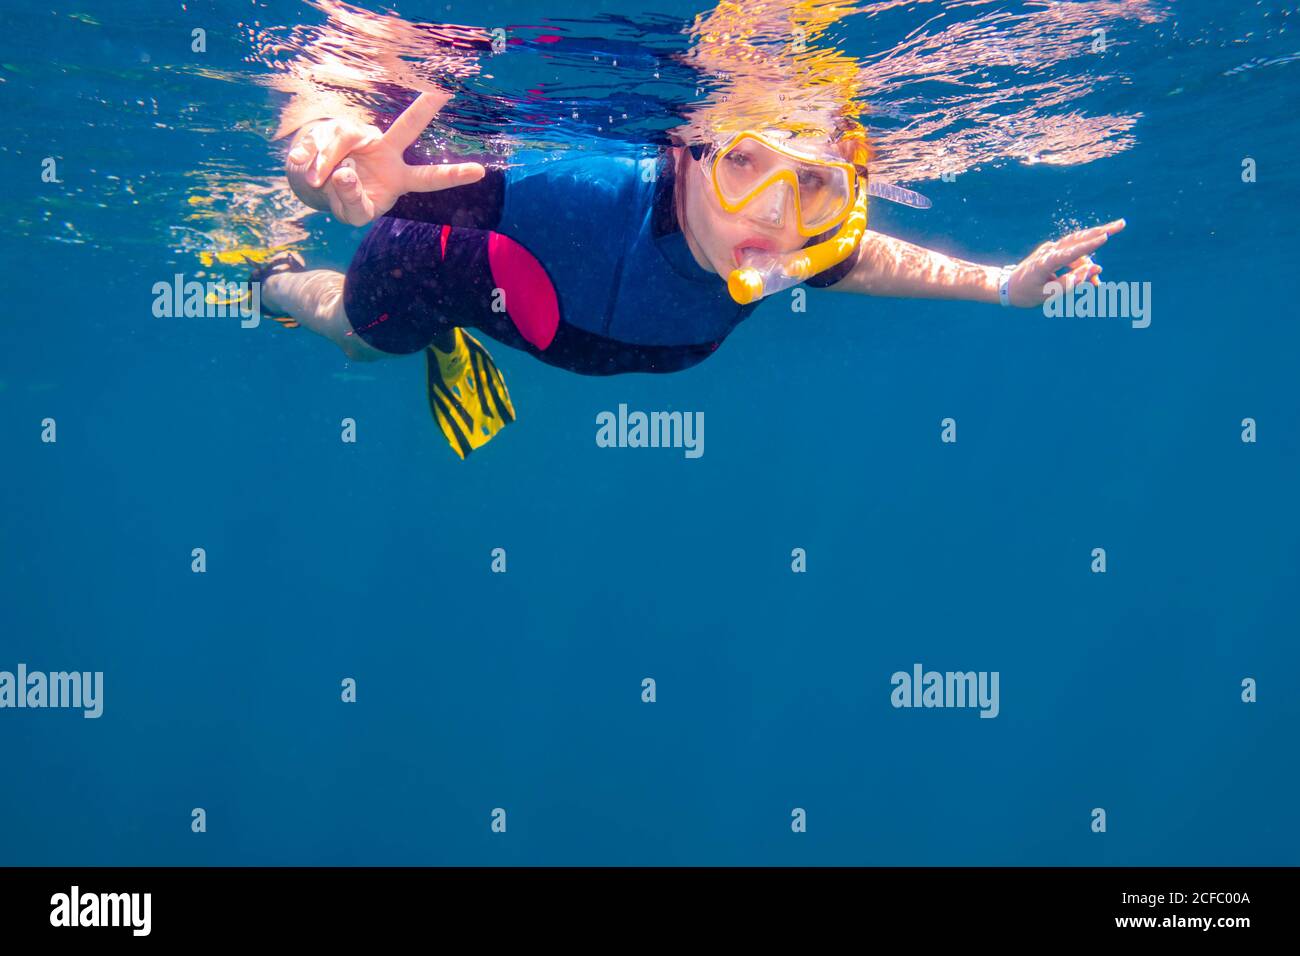 young woman snorkeling in the Ocean, Egypt, Marsa Alam, Africa, Girl with Wet Suit Snorkeling in Ocean Stock Photo